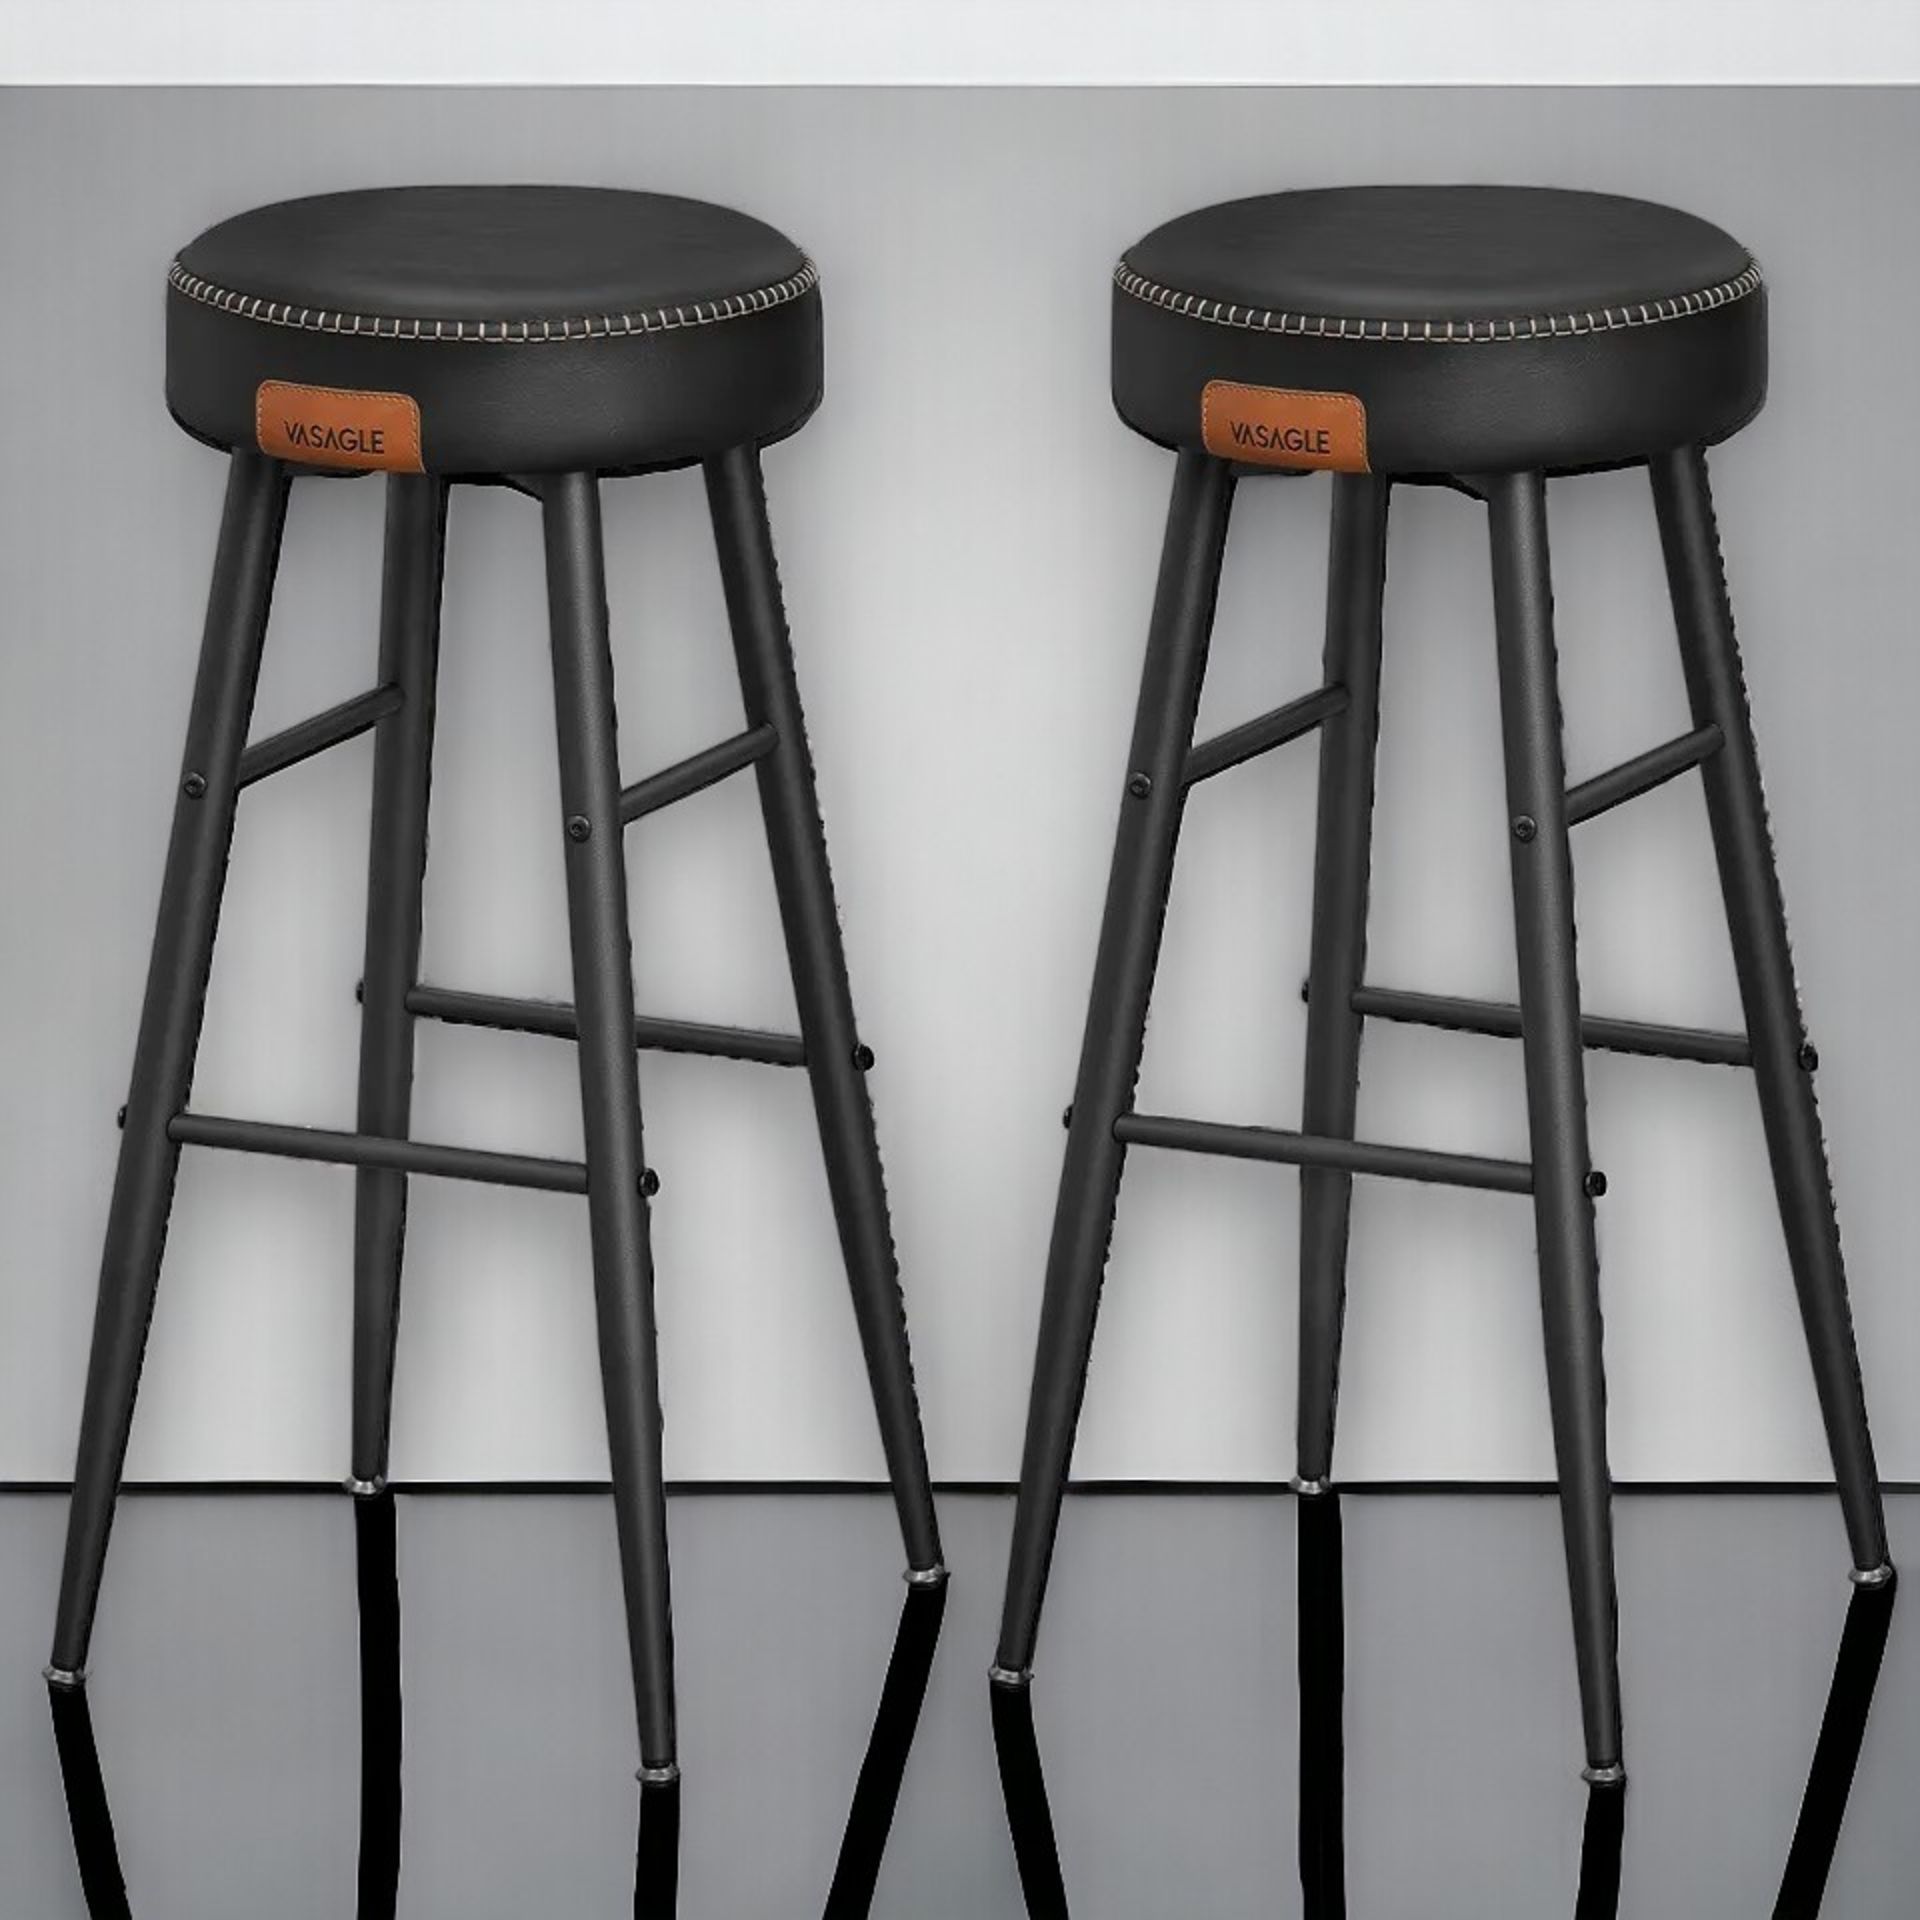 FREE DELIVERY - BRAND NEW BAR STOOLS SET OF 2 KITCHEN COUNTER STOOLS BREAKFAST